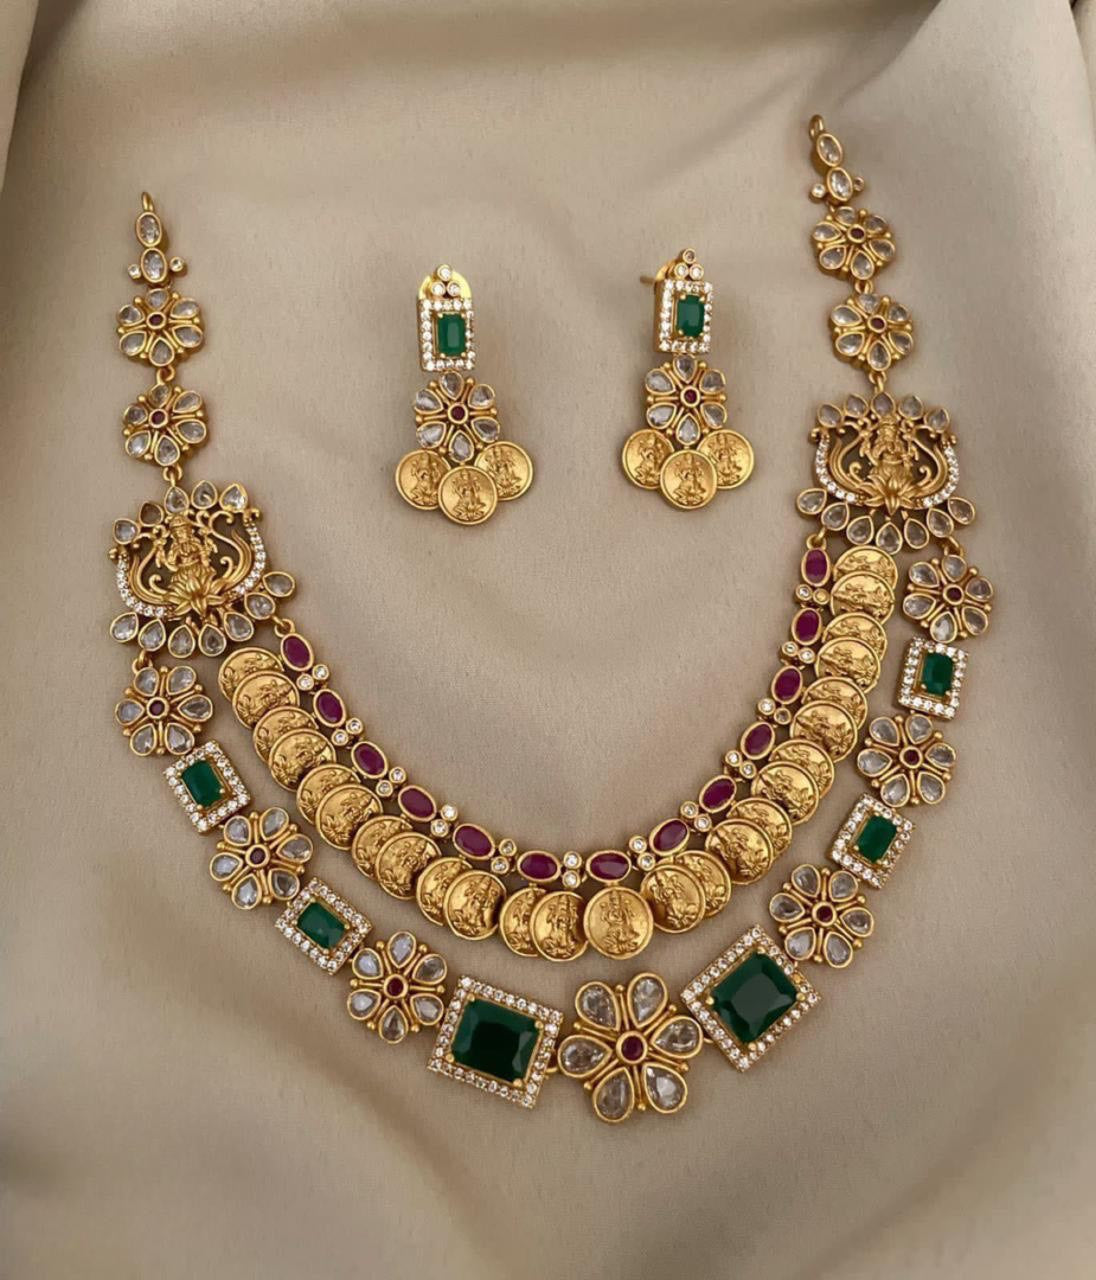 Exquisite Designer Temple Jewelry Coin Necklace Set with Earrings Lakshmi Design-Red and Green